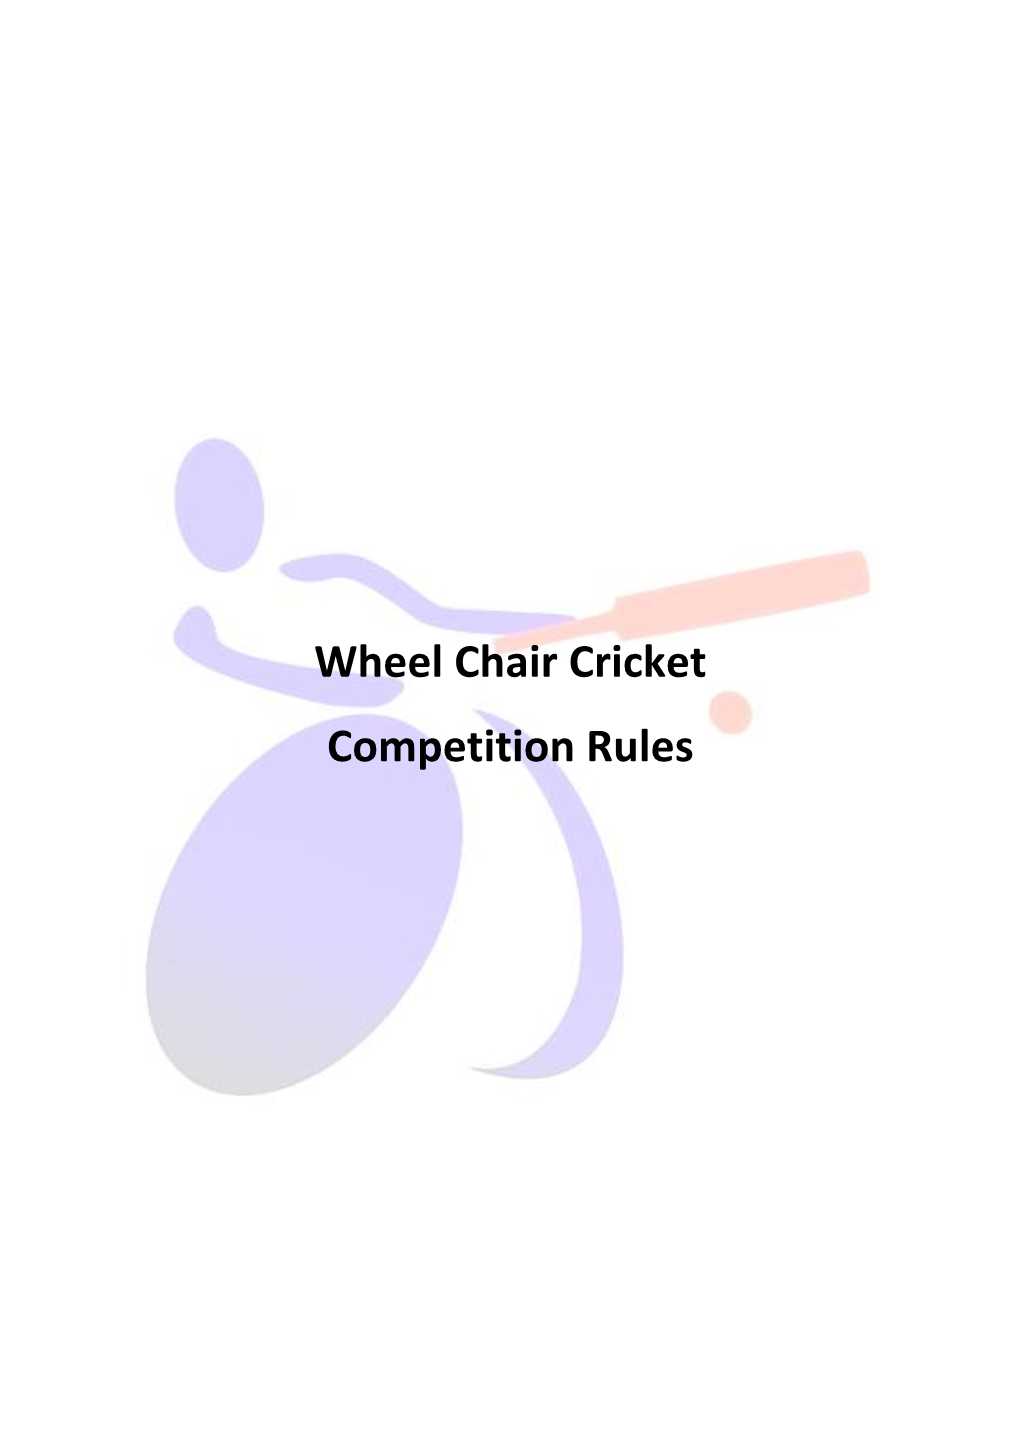 Wheel Chair Cricket Competition Rules